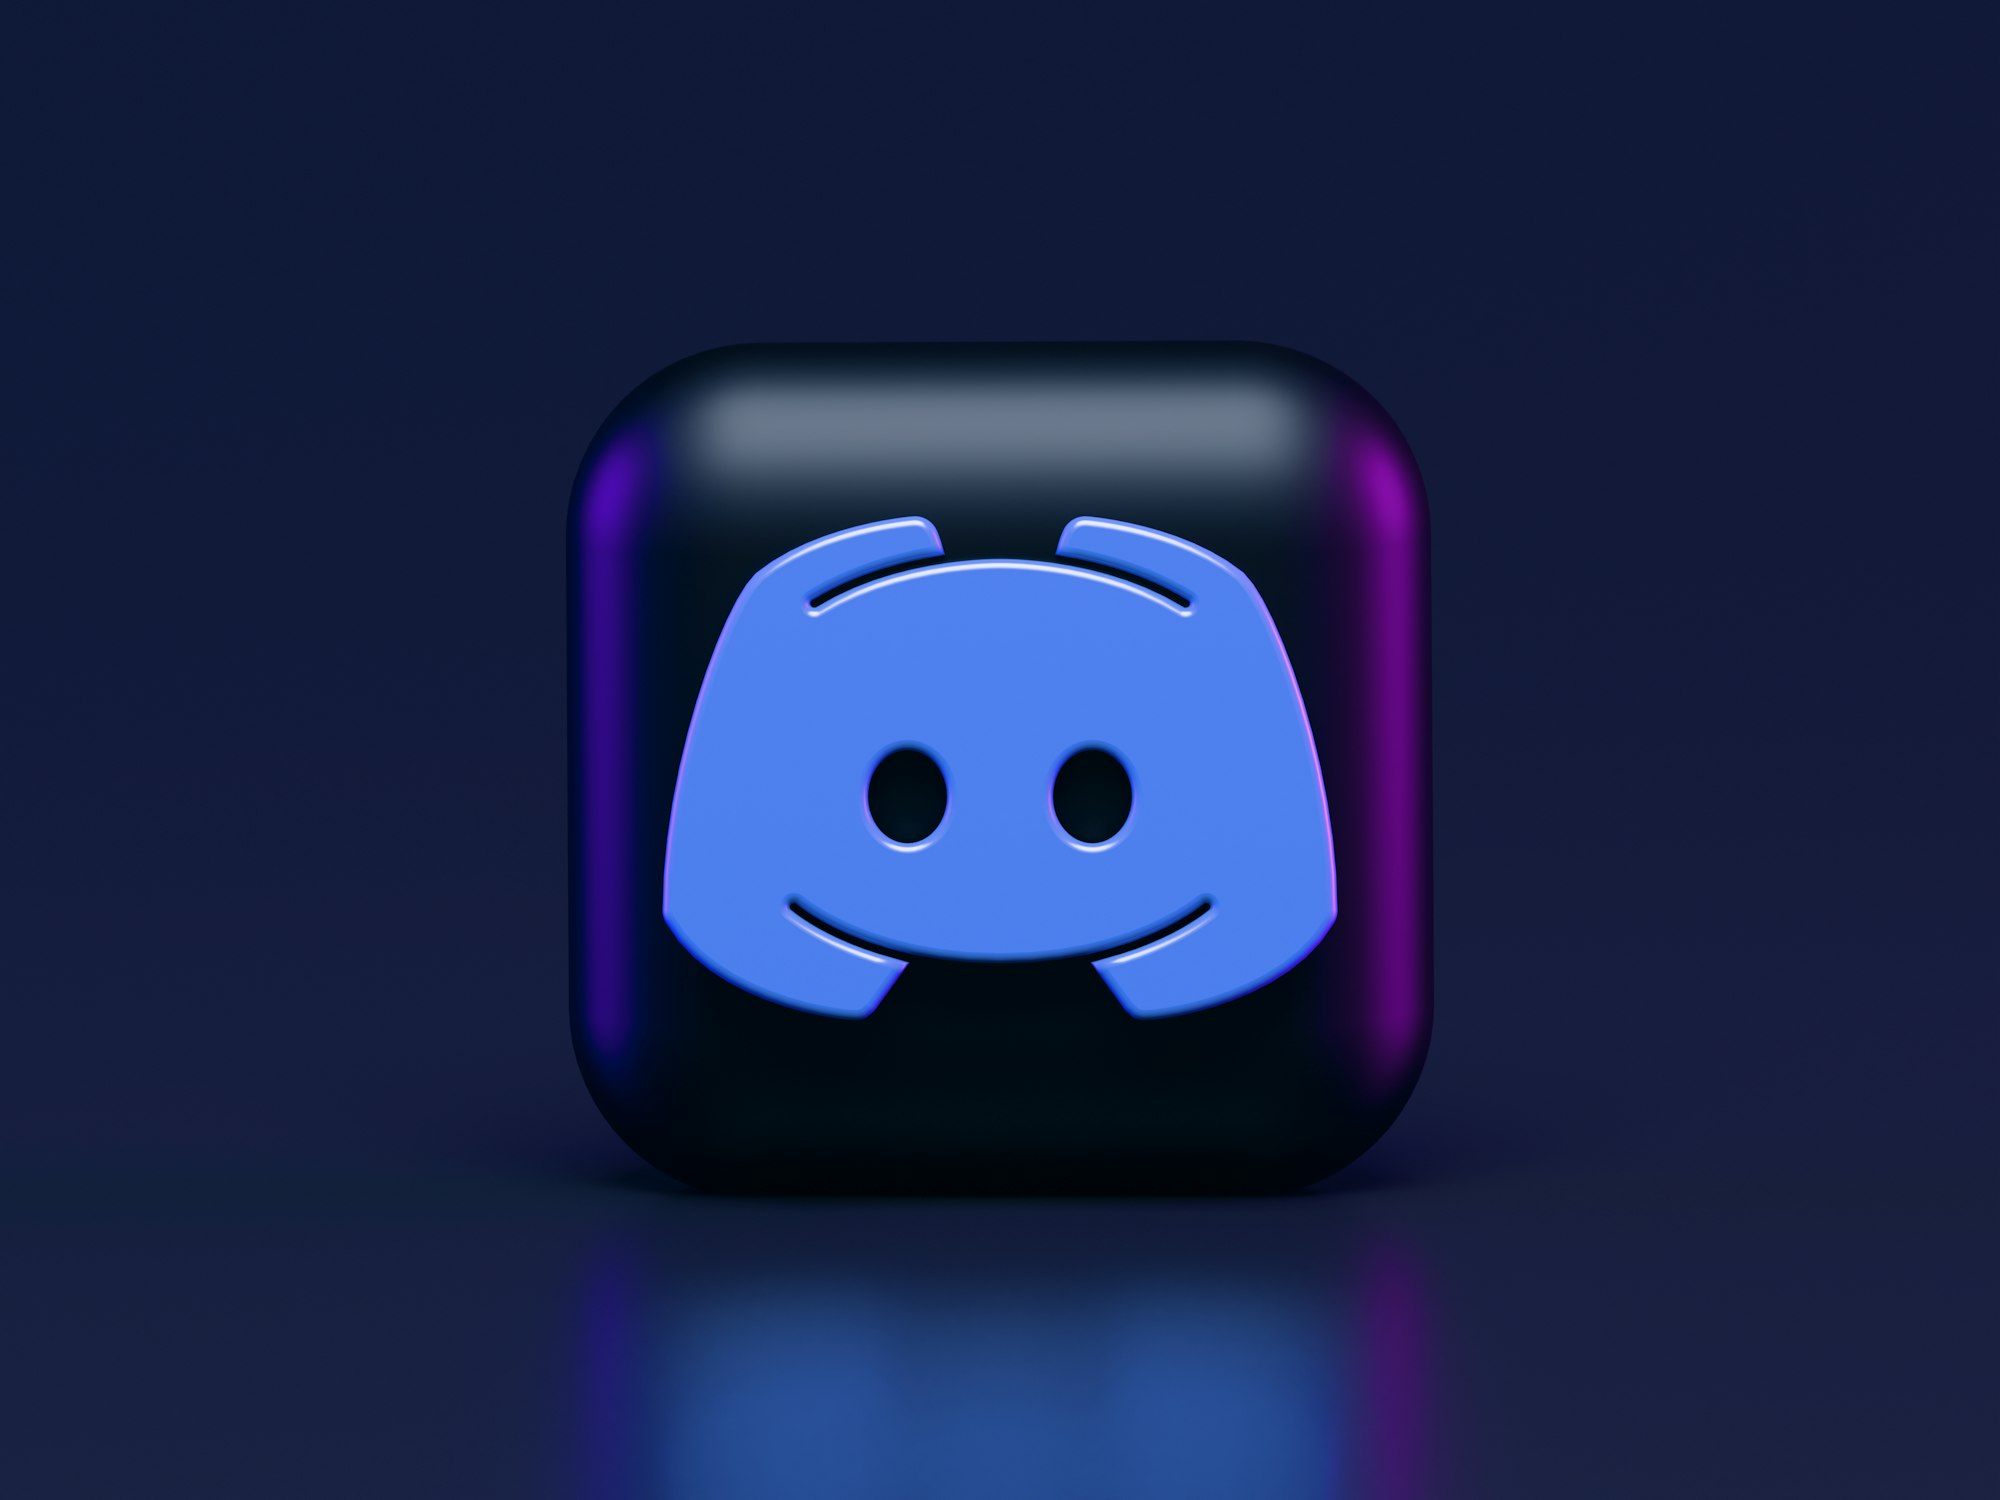 Discord 3d Icon Concept. Dark Mode Style. Write me, if you need similar icons for your products 🖤